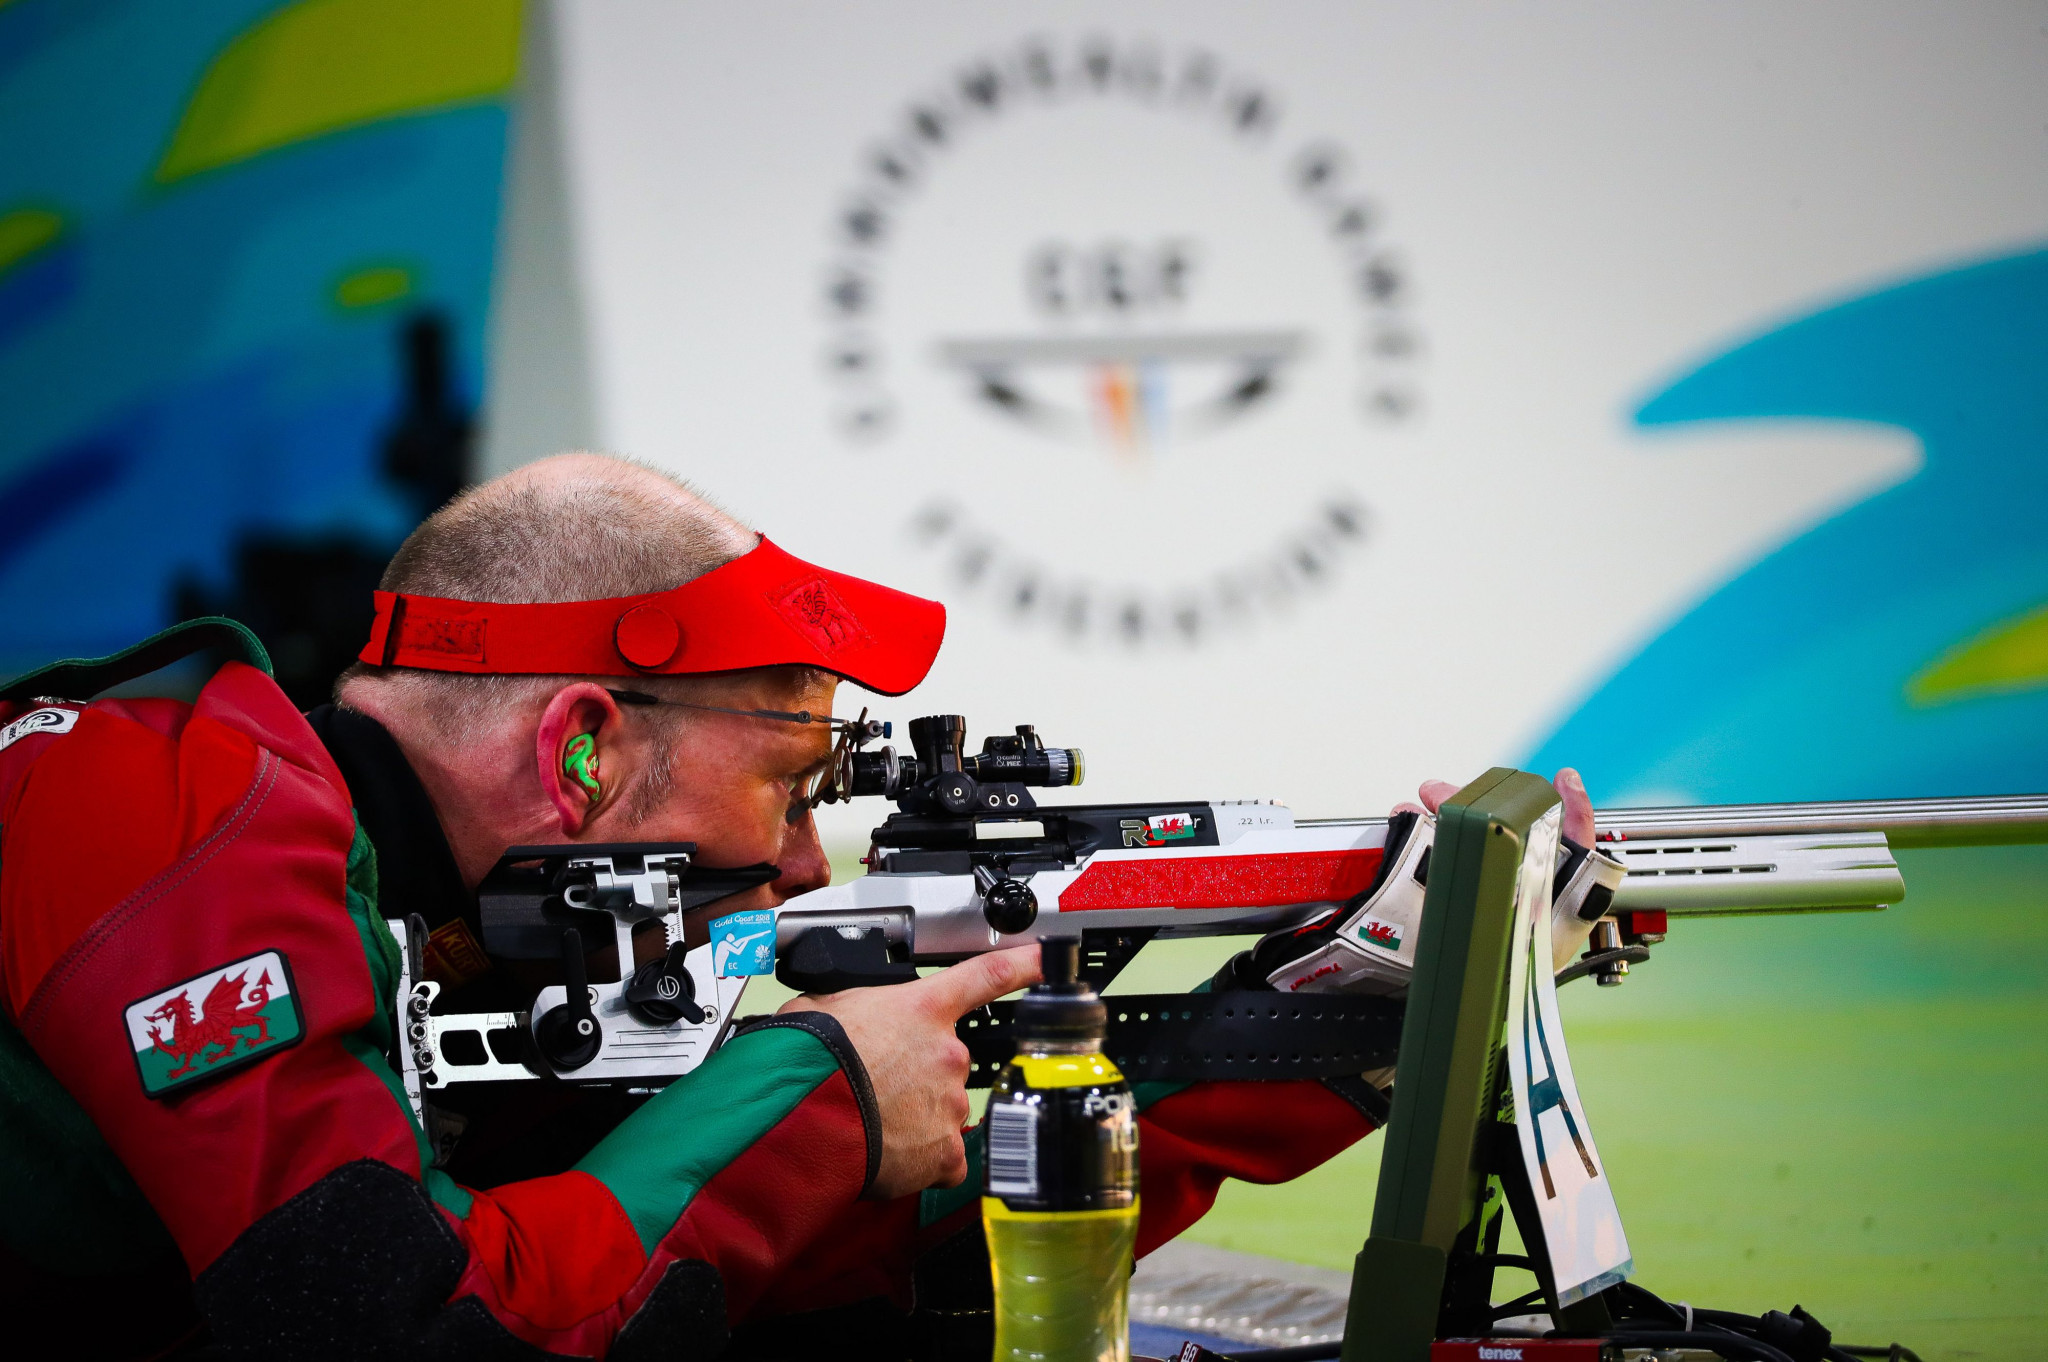 Wales' David Phelps marked his 41st birthday in style as he won the men’s 50 metres rifle prone shooting event today at the Gold Coast 2018 Commonwealth Games ©Getty Images